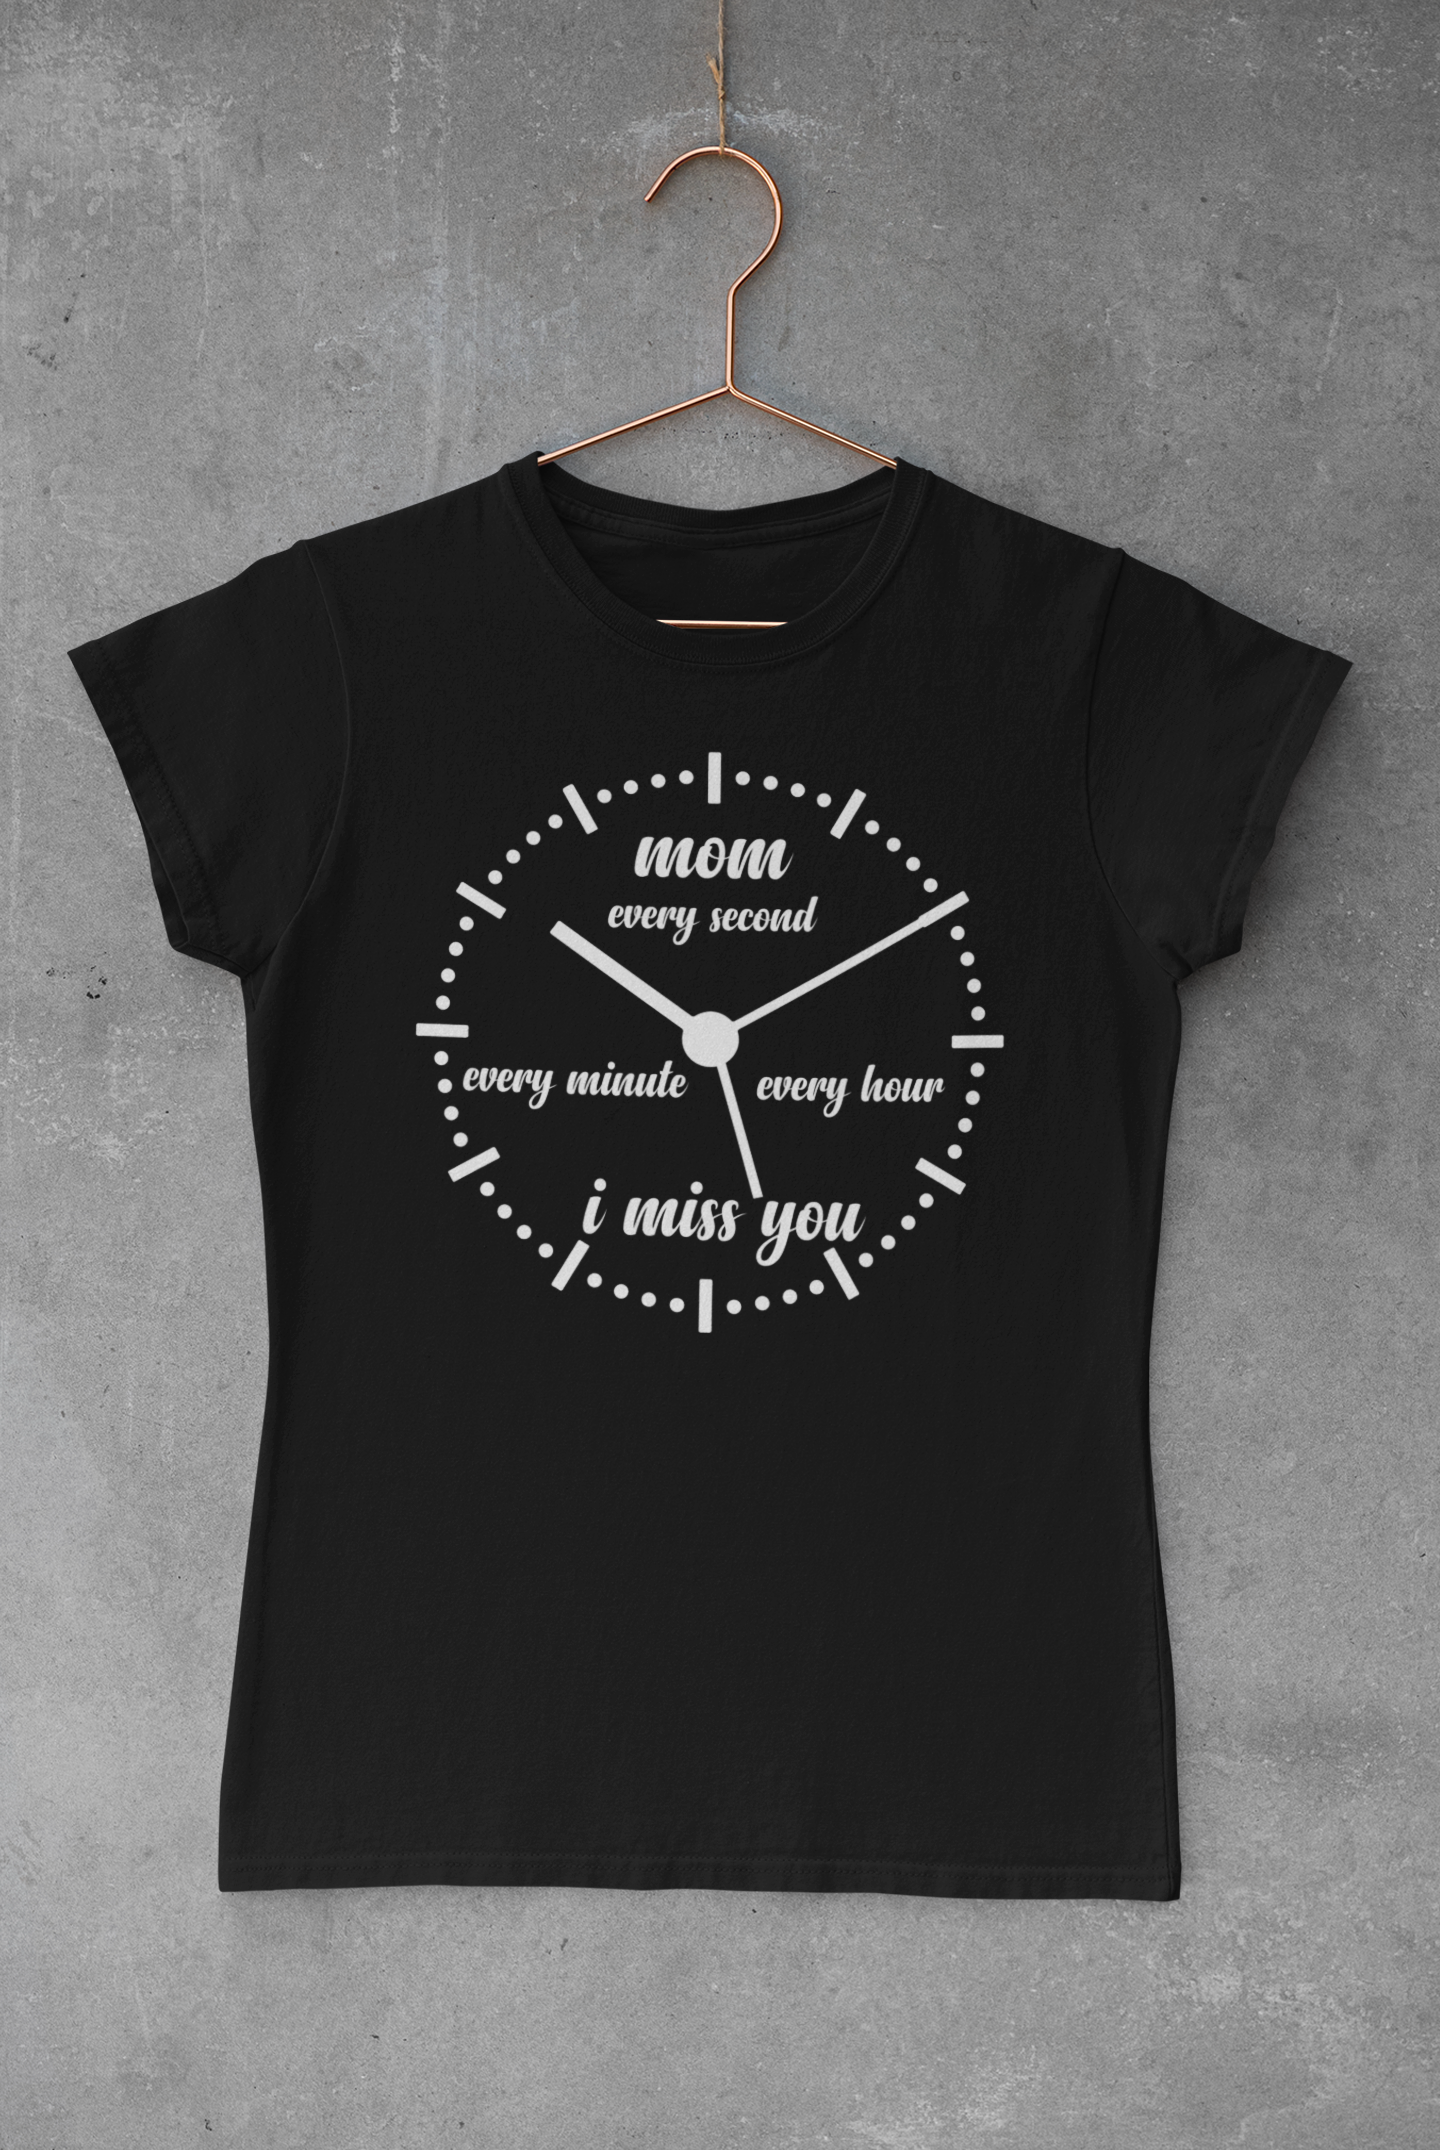 Mom Every Second T-shirt